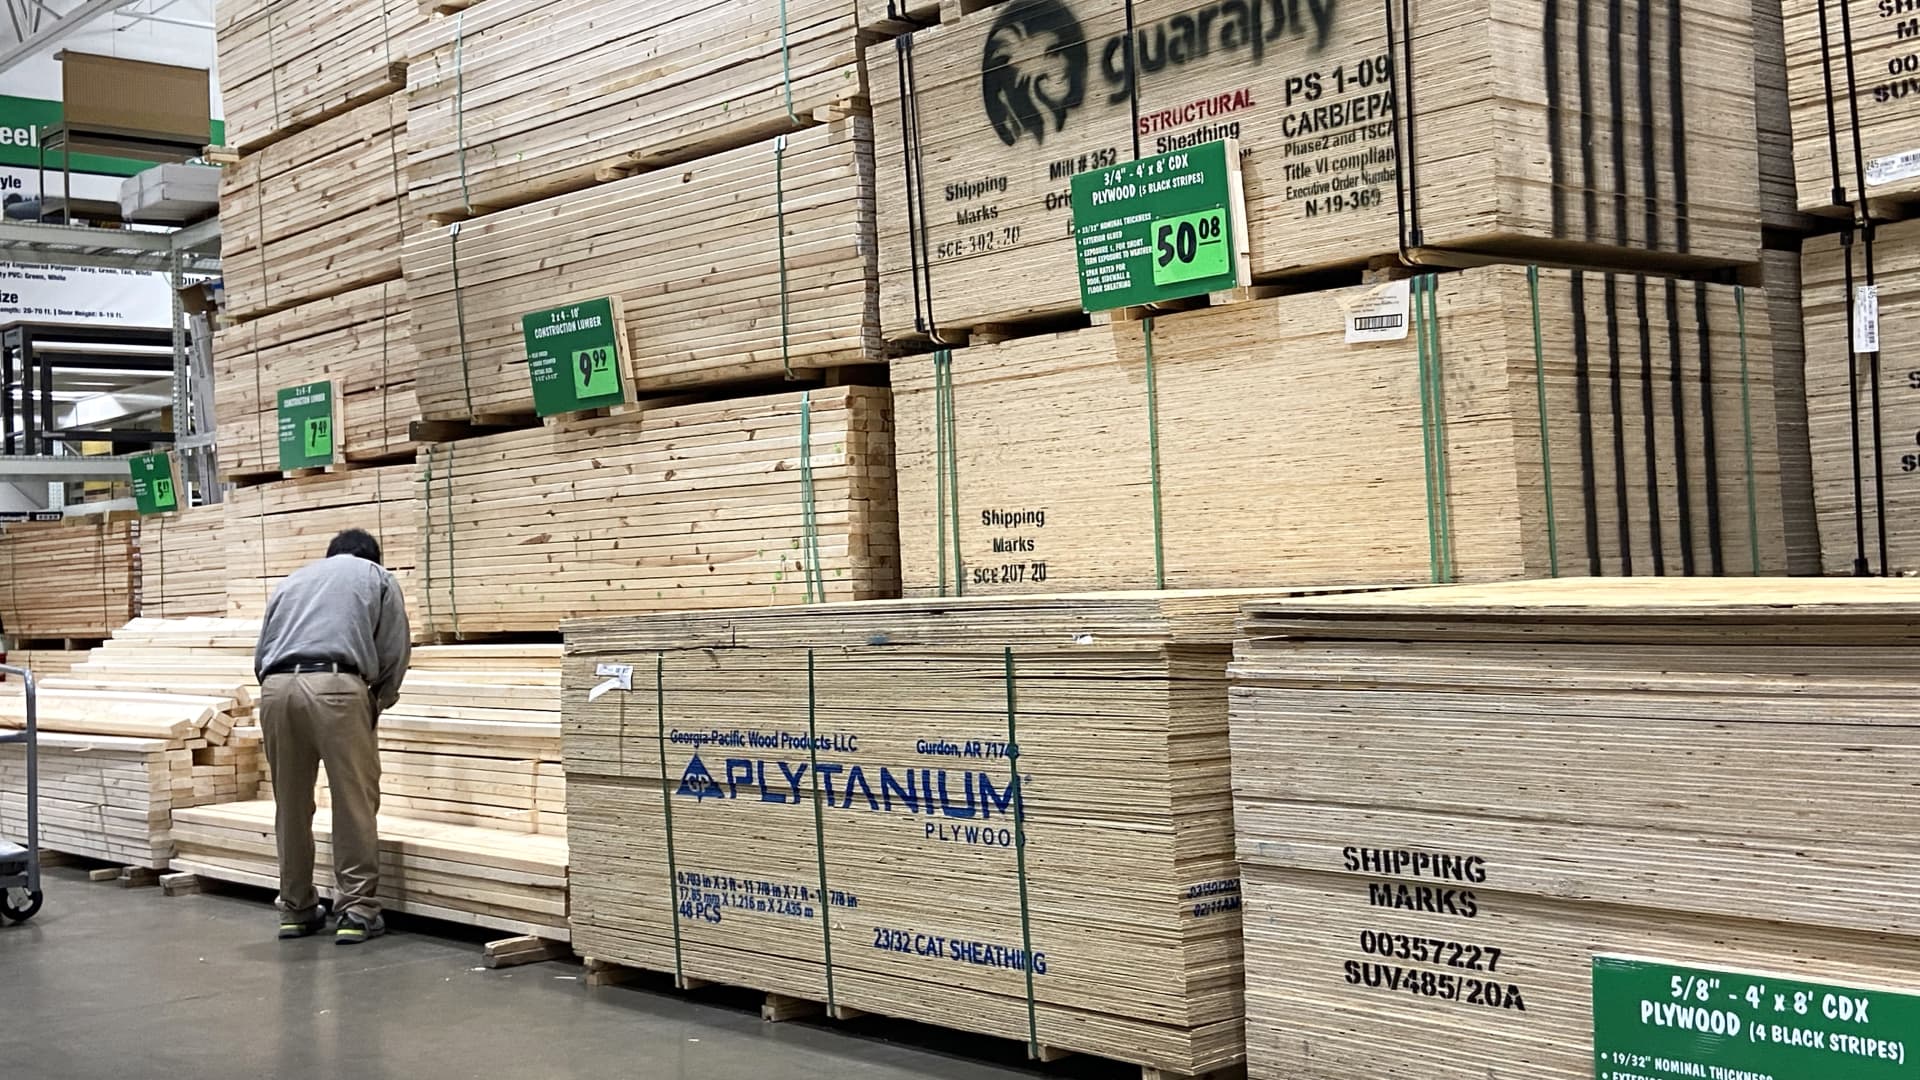 Stacks of lumber are offered for sale at a home center on April 05, 2021 in Chicago, Illinois.